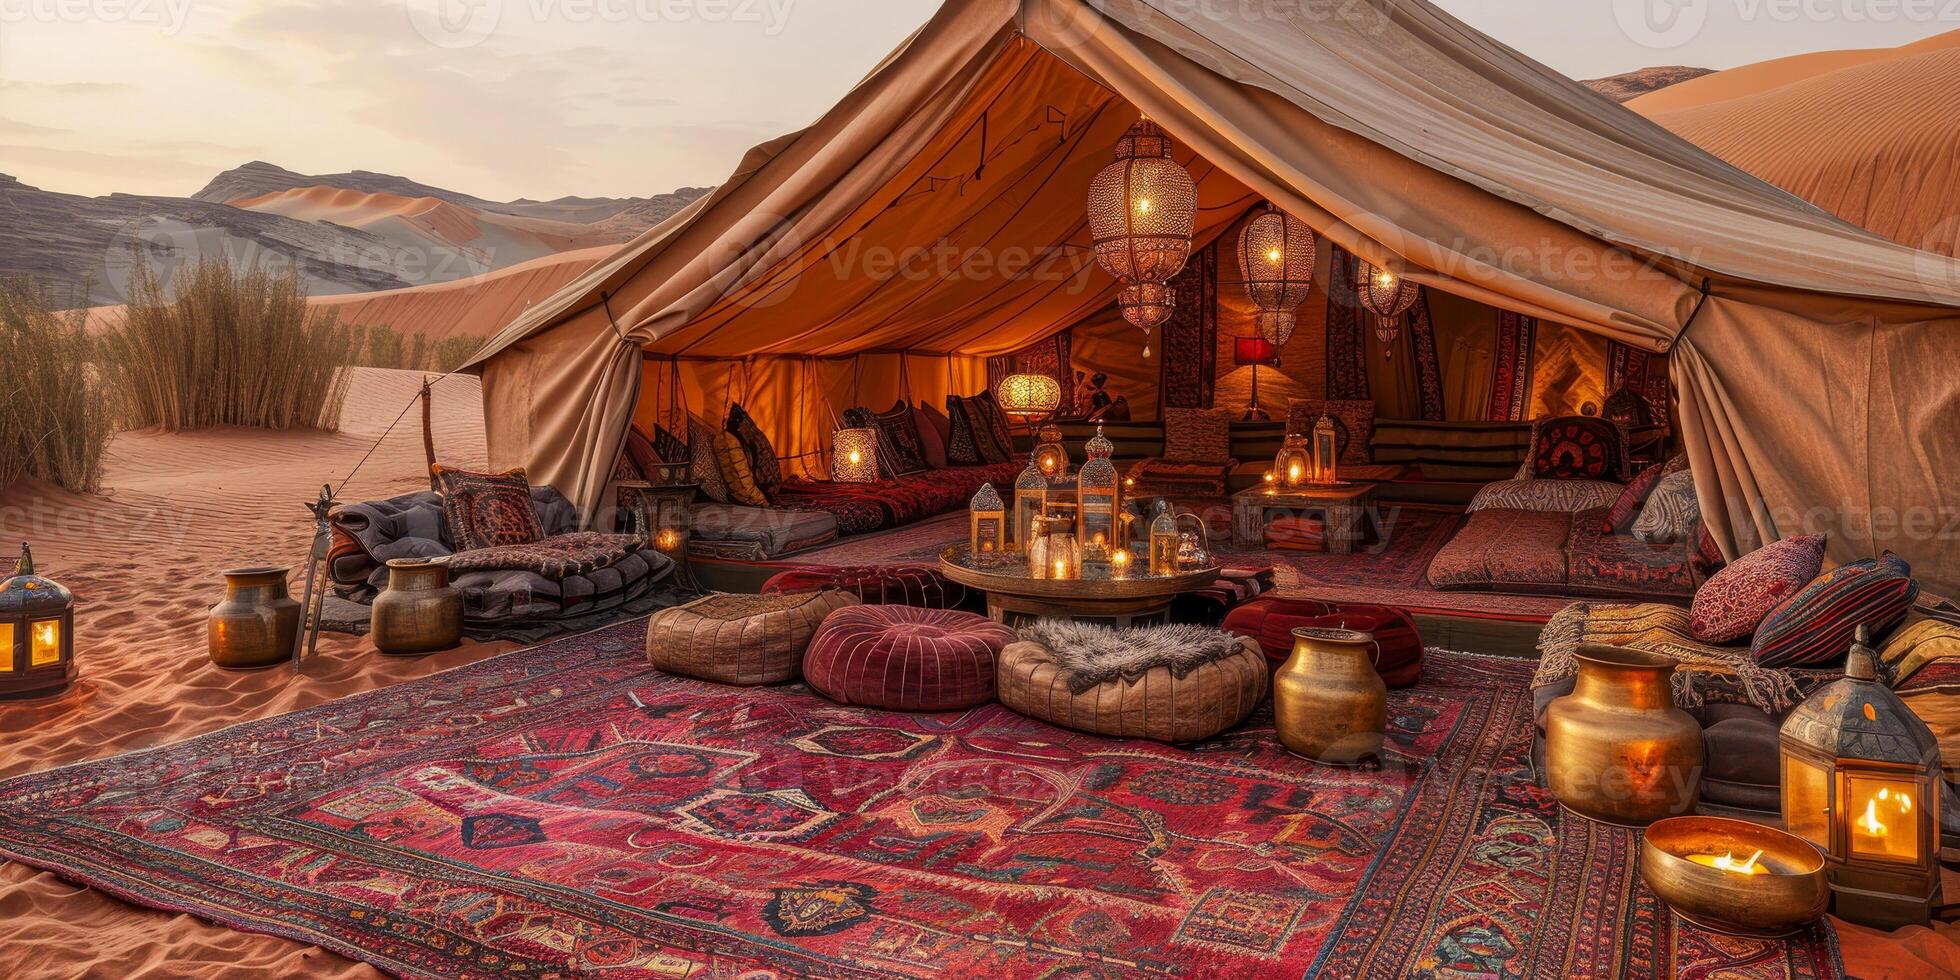 Luxurious Arabian Style Tent With Couch and Table Inside photo